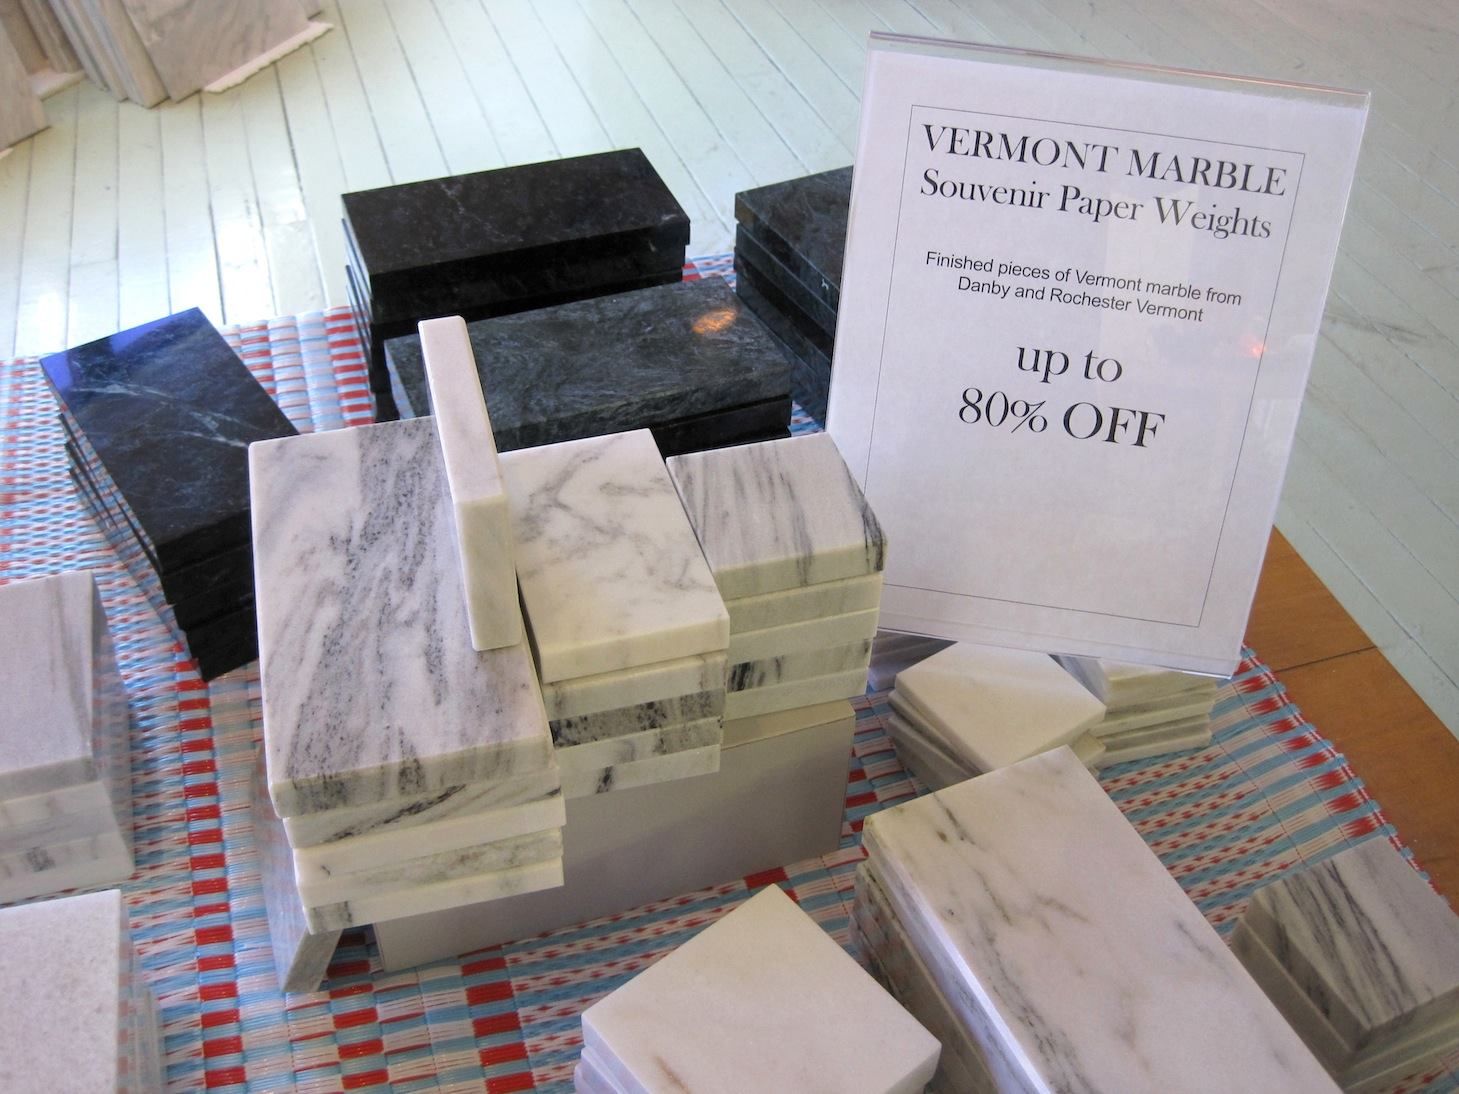 World’s Largest Marble Exhibit, world record in Proctor, Vermont